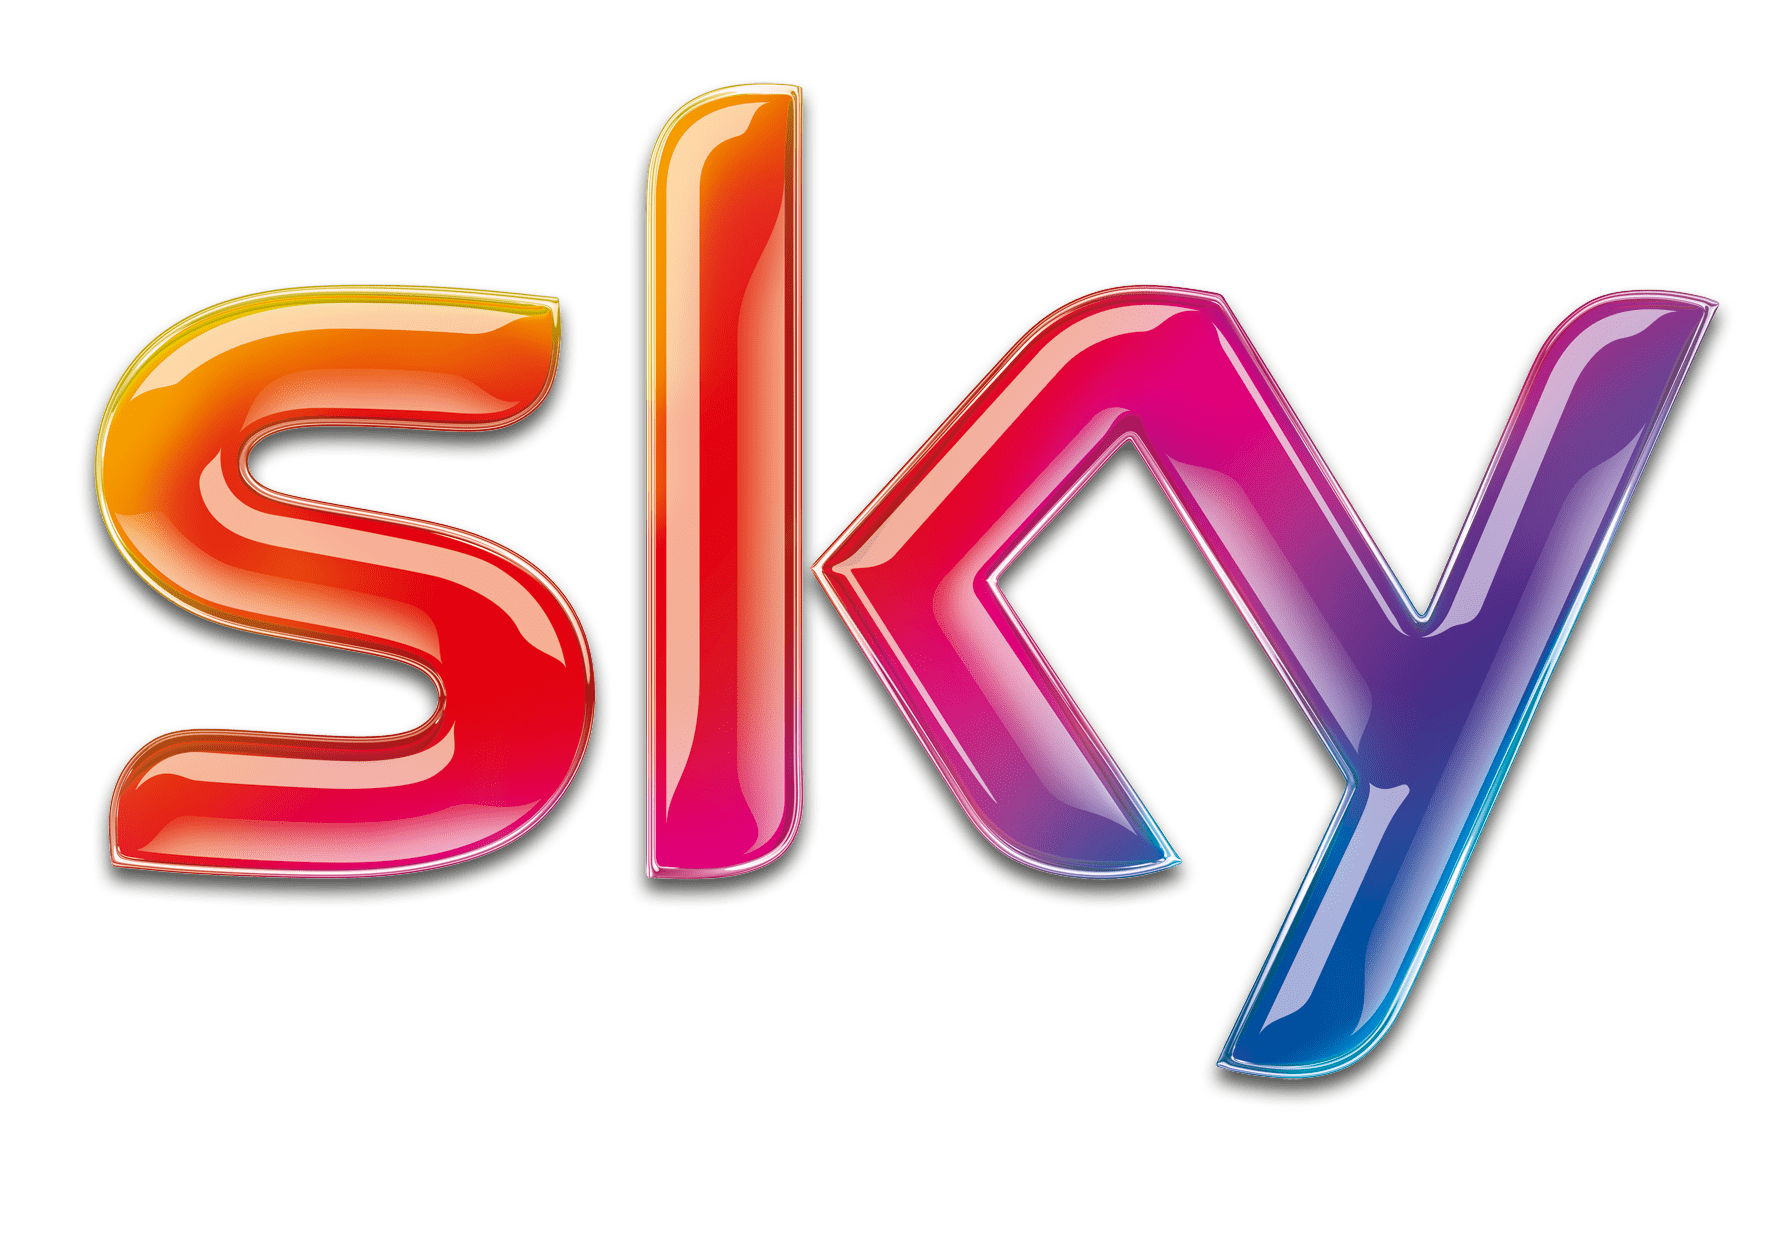 Sky’s Exclusive Offers: How to Score Big Savings with Coupons and Promotions